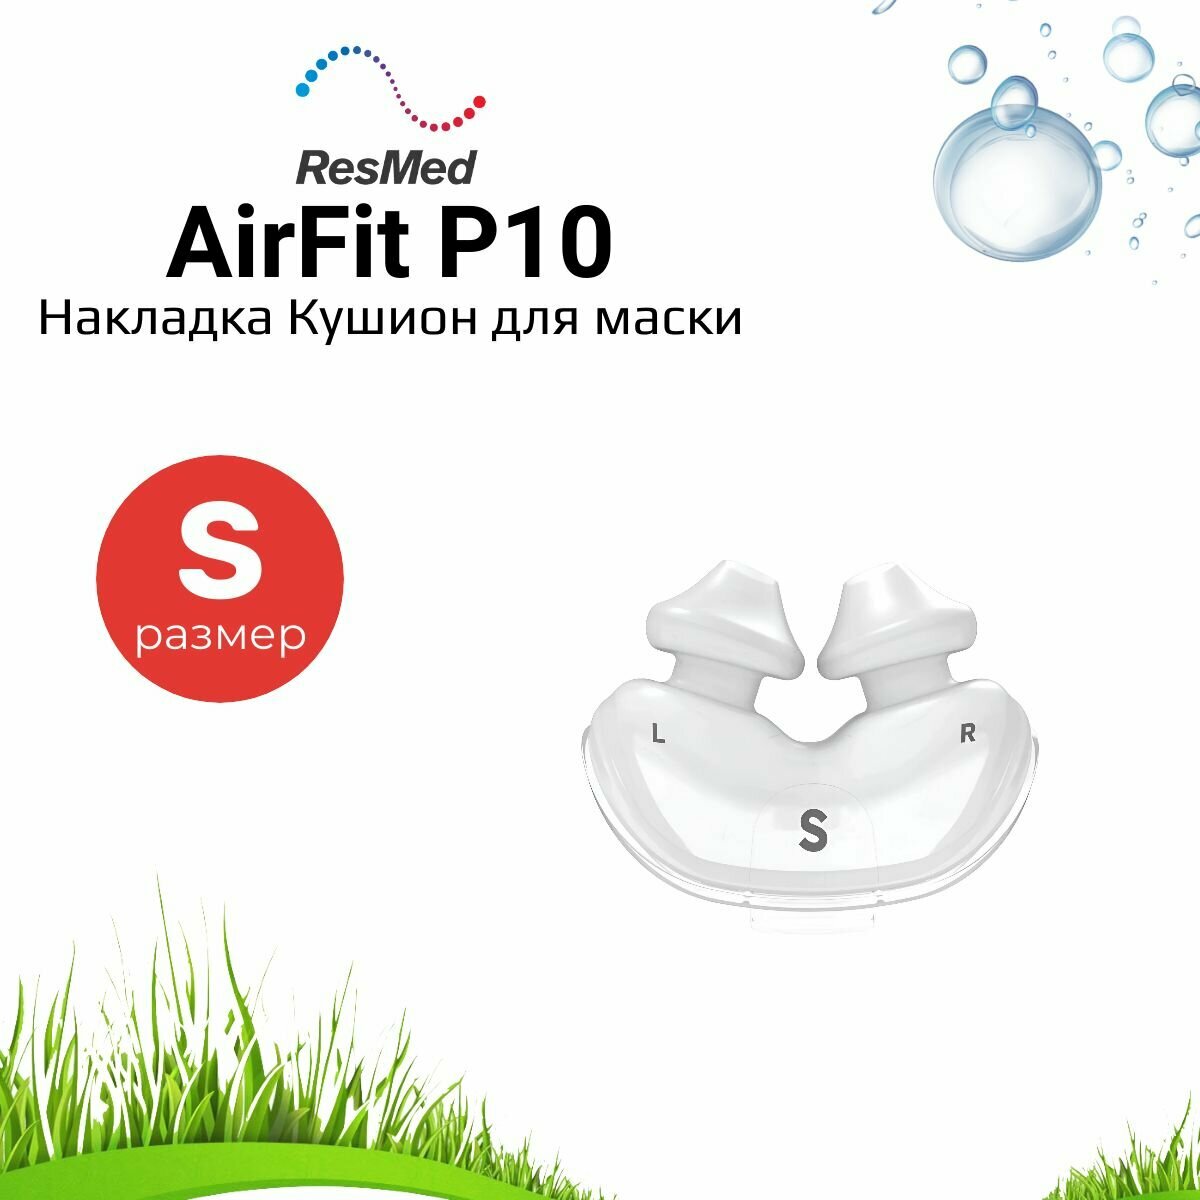 ResMed AirFit P10 накладка (кушион) размер SMALL